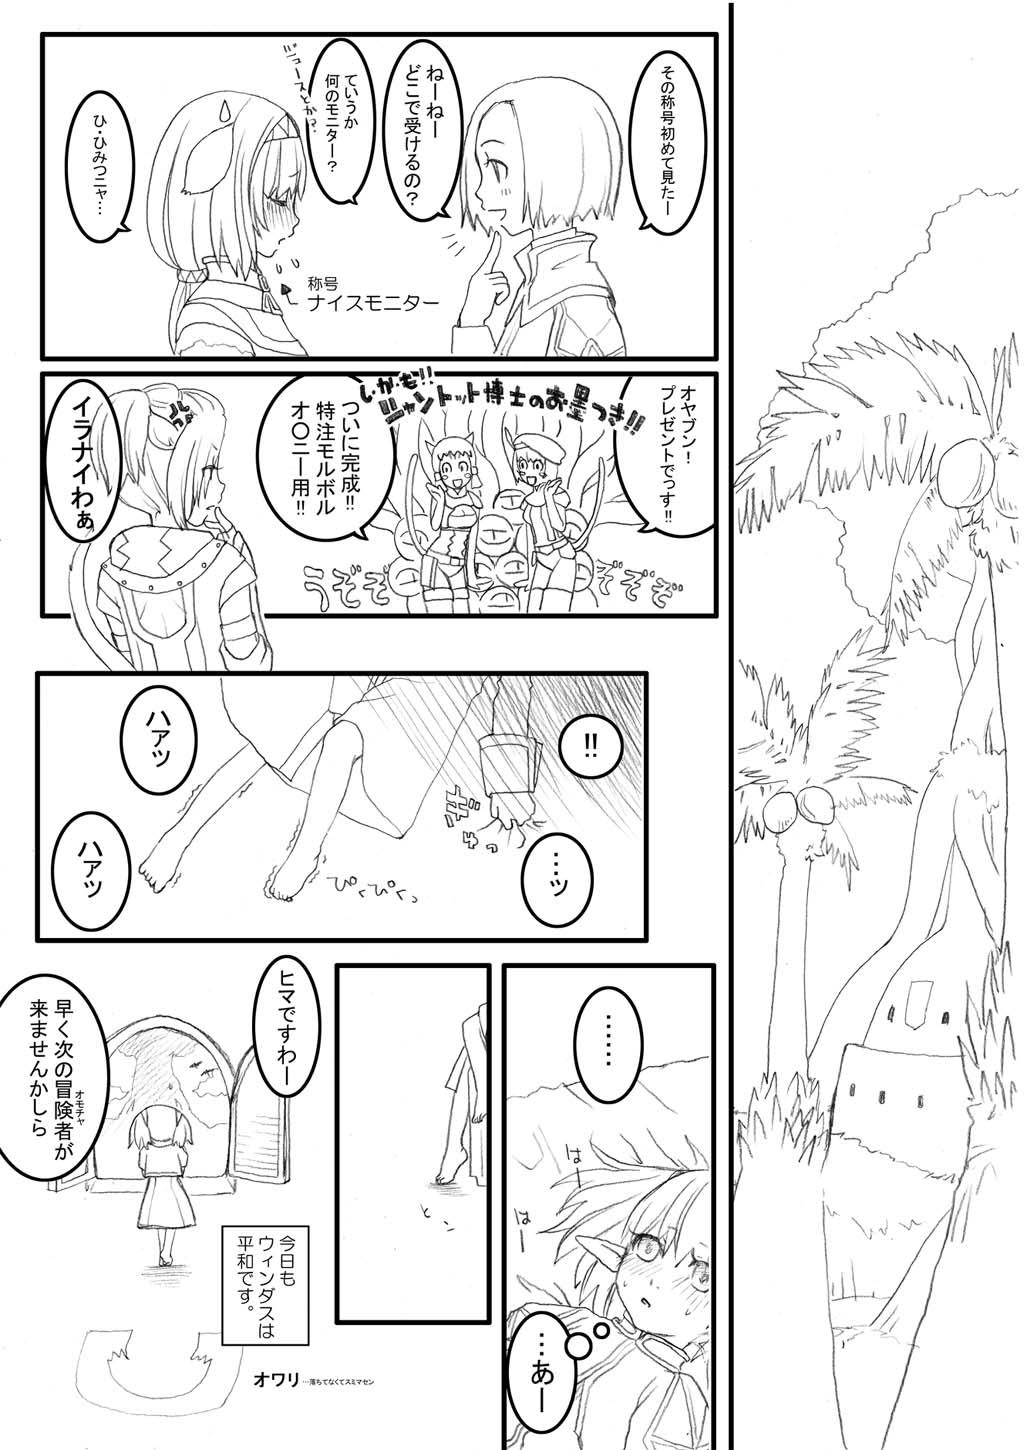 Abuse あれ - Final fantasy xi Chacal - Page 6